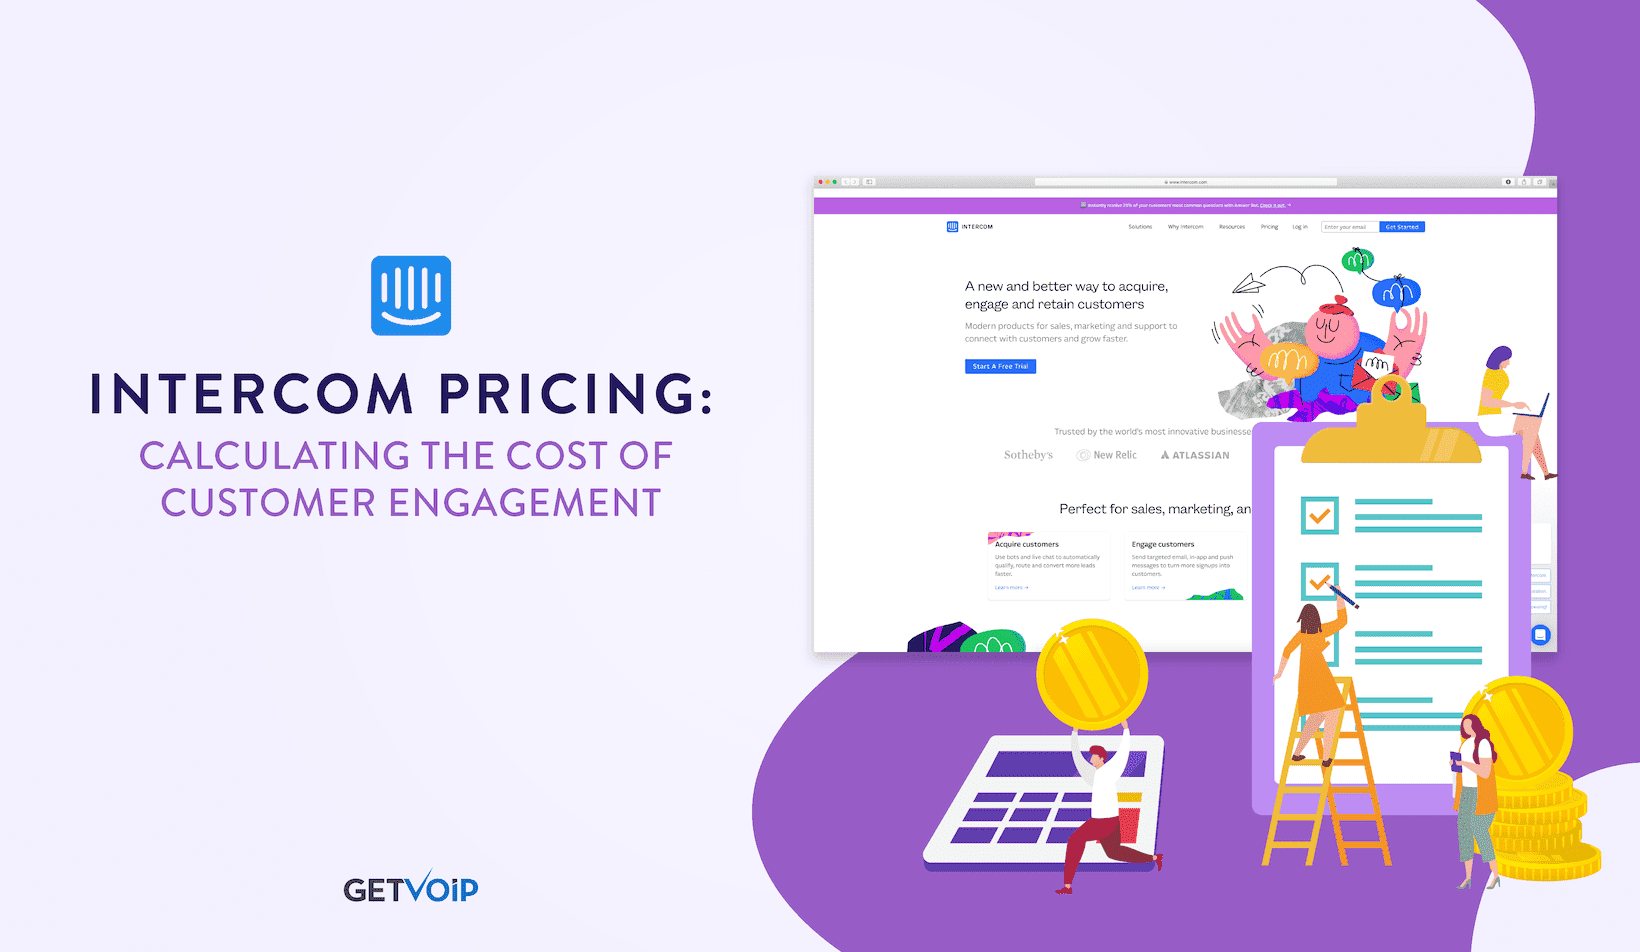 Intercom Pricing: Calculating The Cost of Customer Engagement